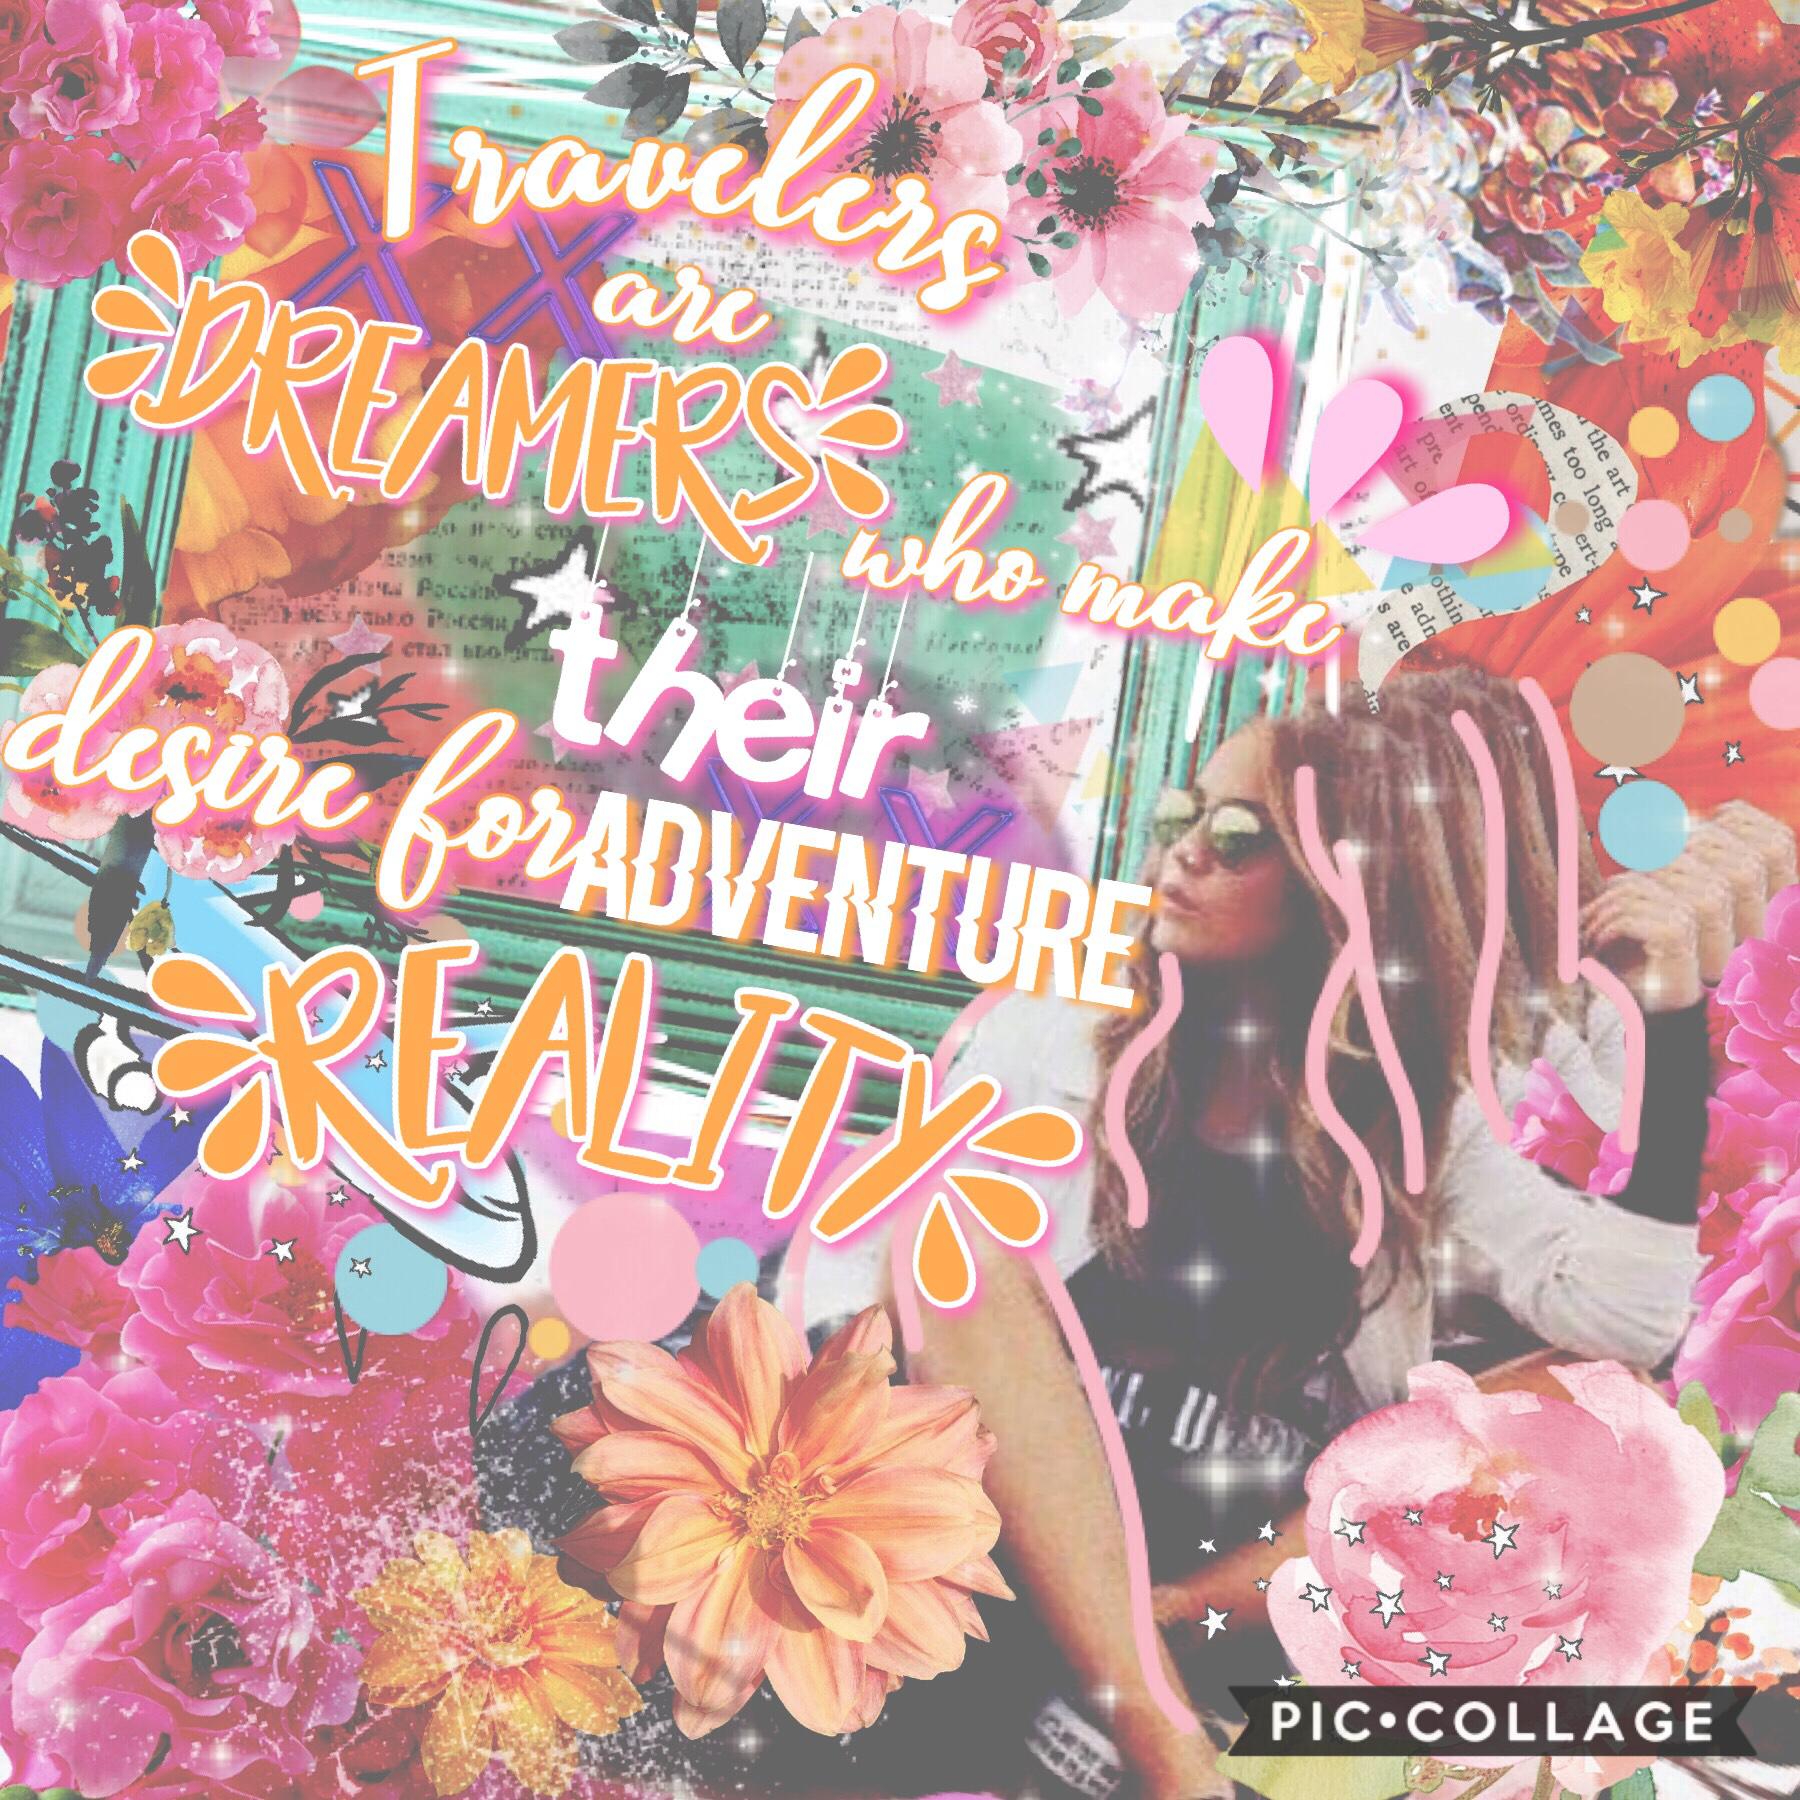 TAPPPPP ❤️
Ok I rrly like this guys! It’s for the travel games of -SUN_LIGHT- and we are working together for this collage! Thx to puppygamer0708 and tropical rain for working together swiftly! And once again, rate 10? Love ya’ll 🙊❤️